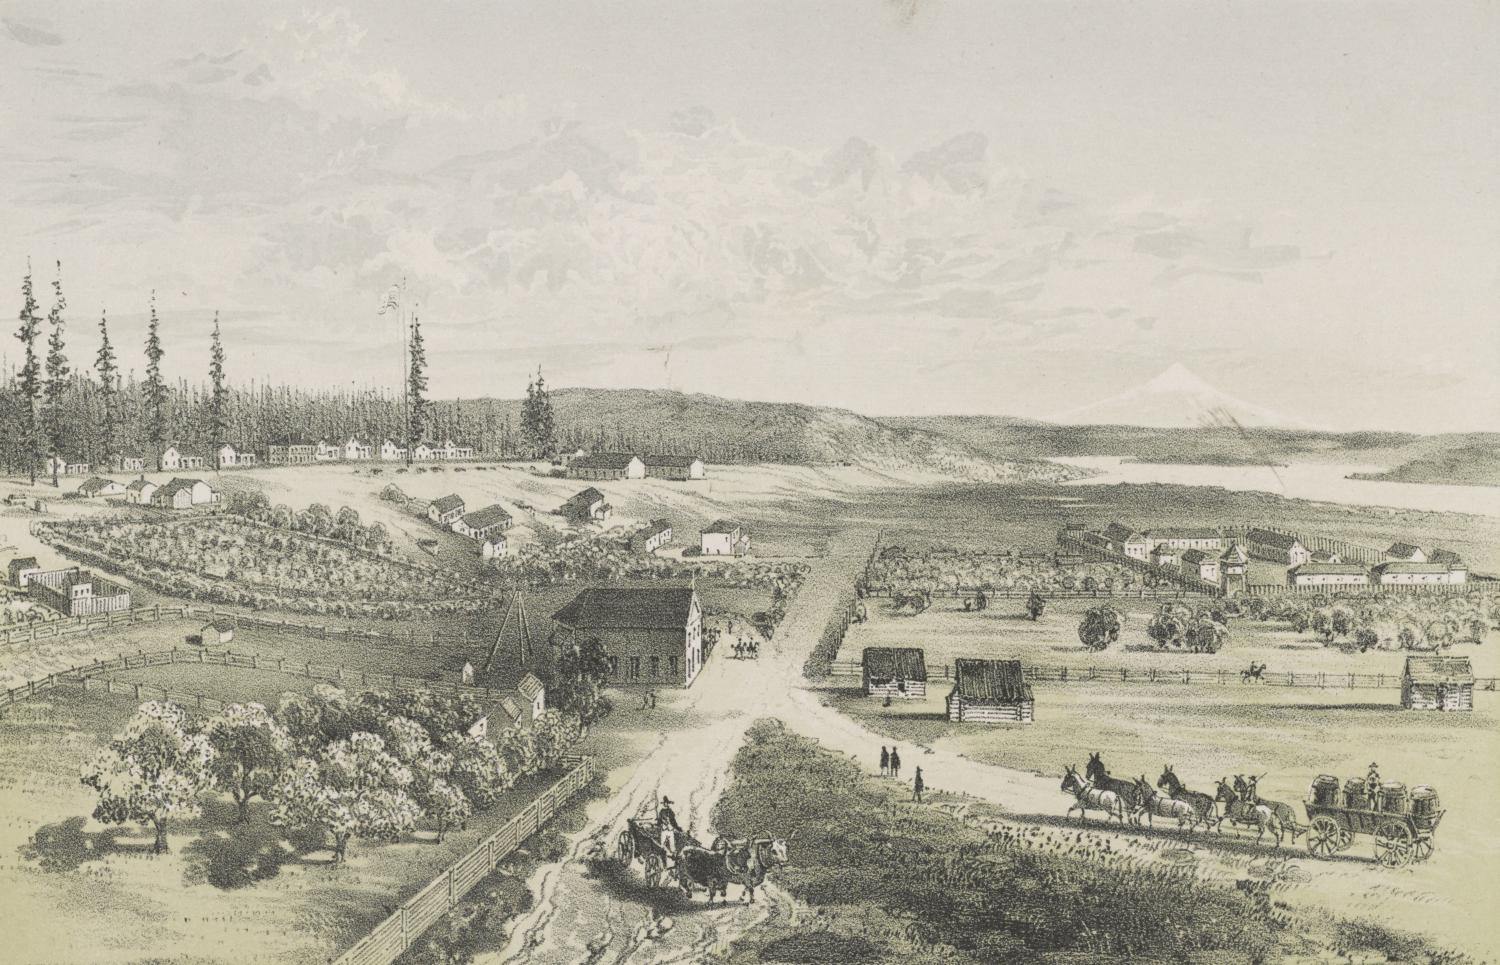 Print of Fort Vancouver